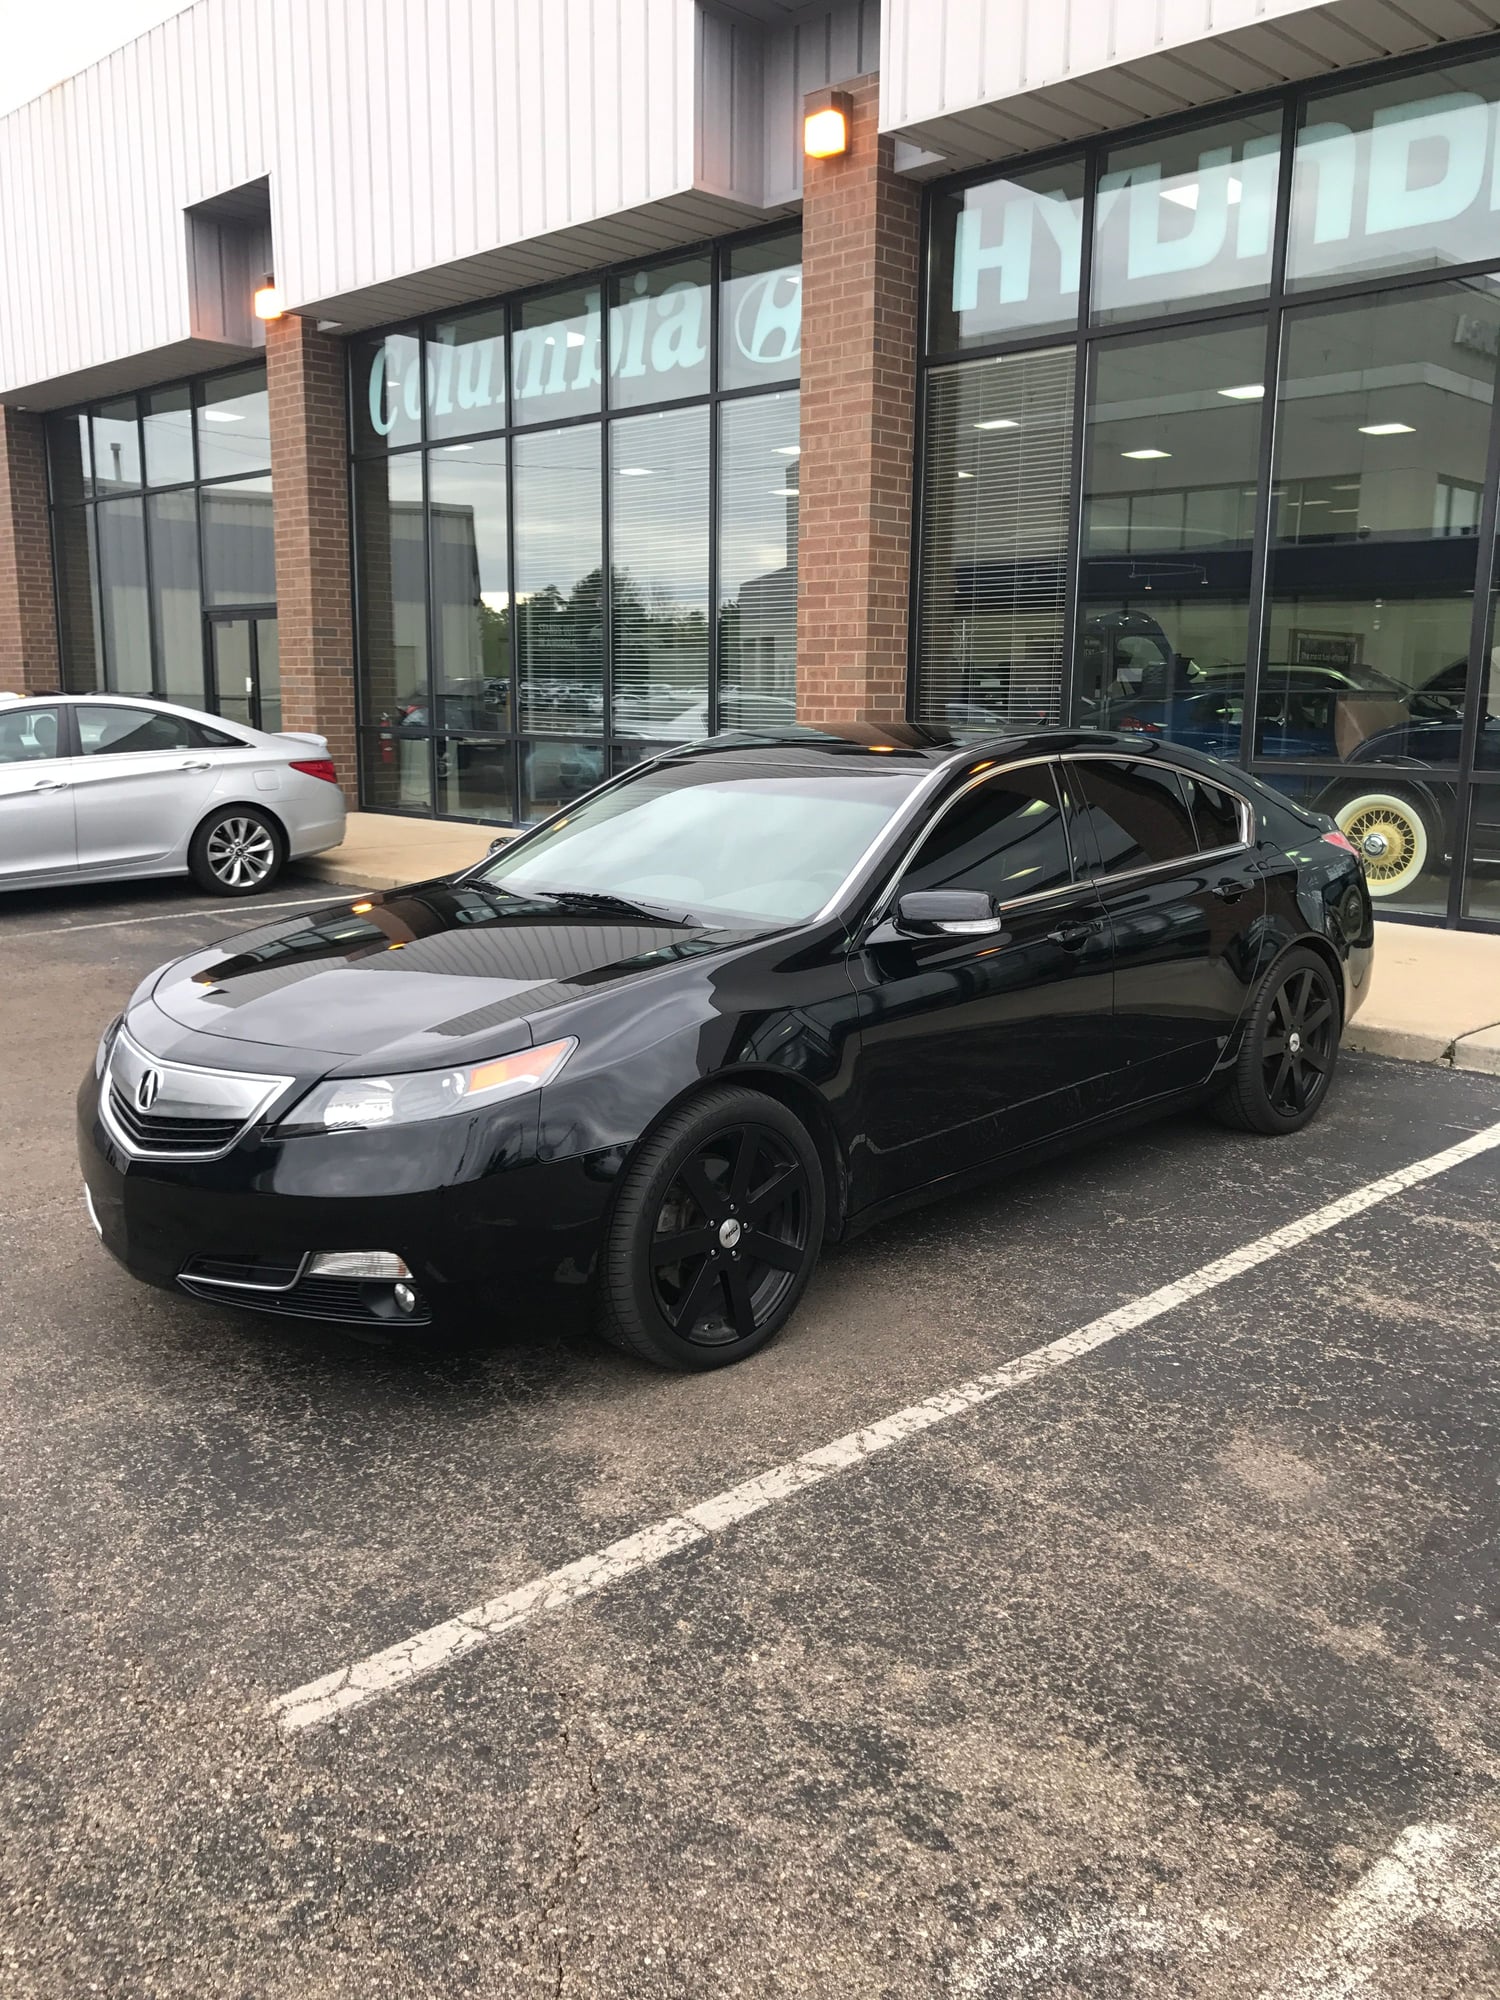 Wheels and Tires/Axles - FS: 19" TSW Bardo black wheels with 245 40 19 98YX Continental Extreme Contact tires - Used - 2009 to 2014 Acura TL - Cincinnati, OH 45236, United States